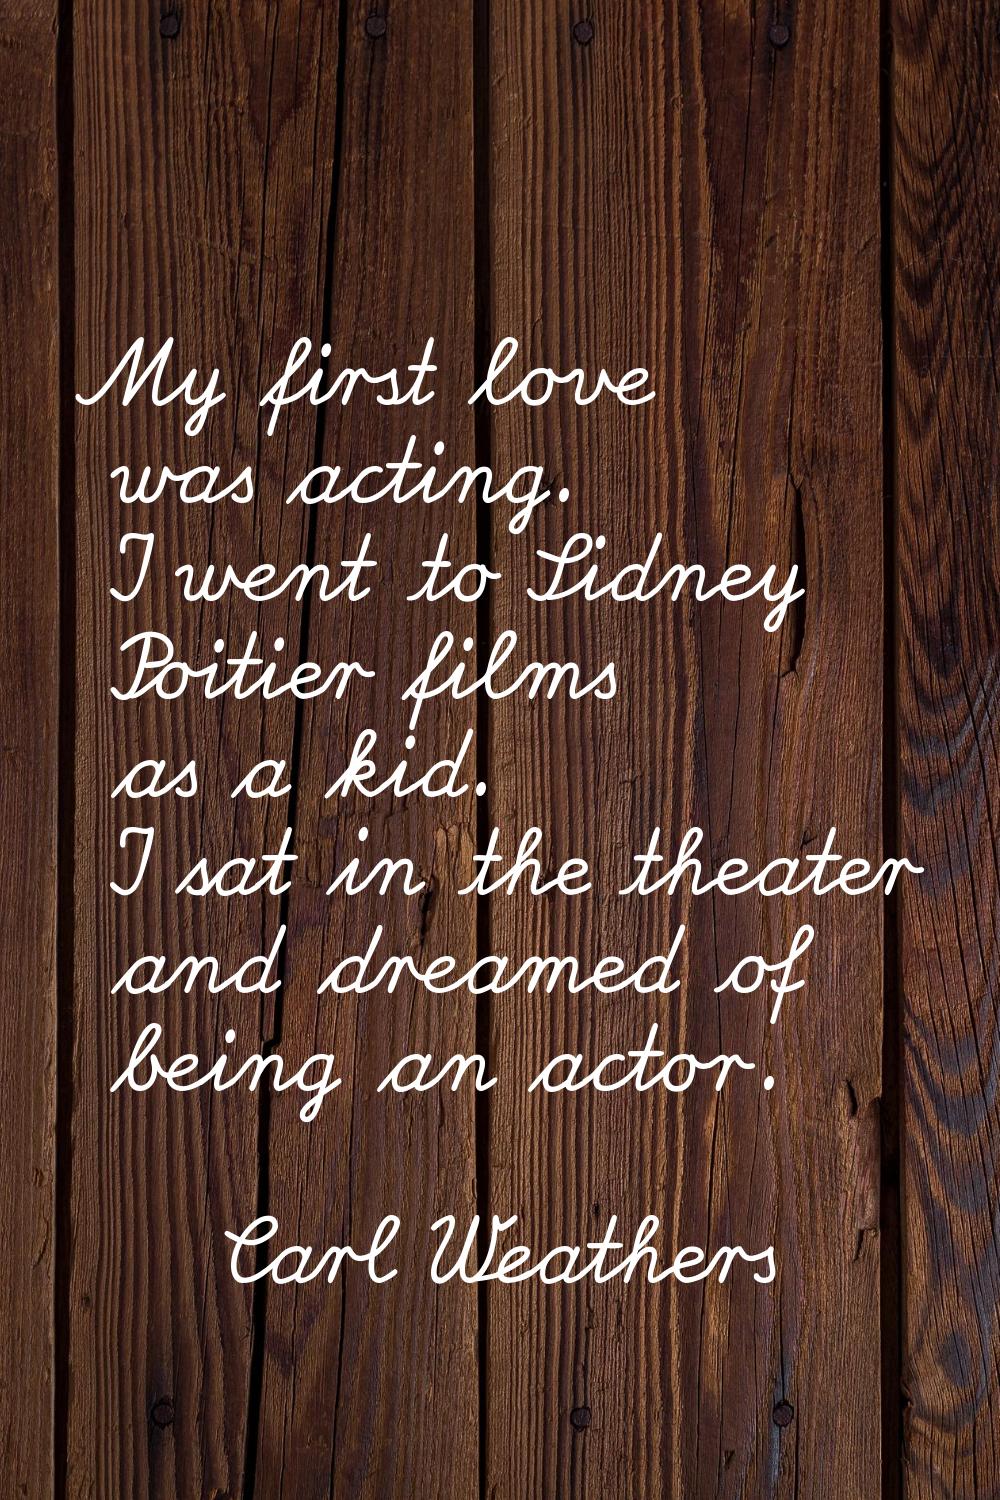 My first love was acting. I went to Sidney Poitier films as a kid. I sat in the theater and dreamed